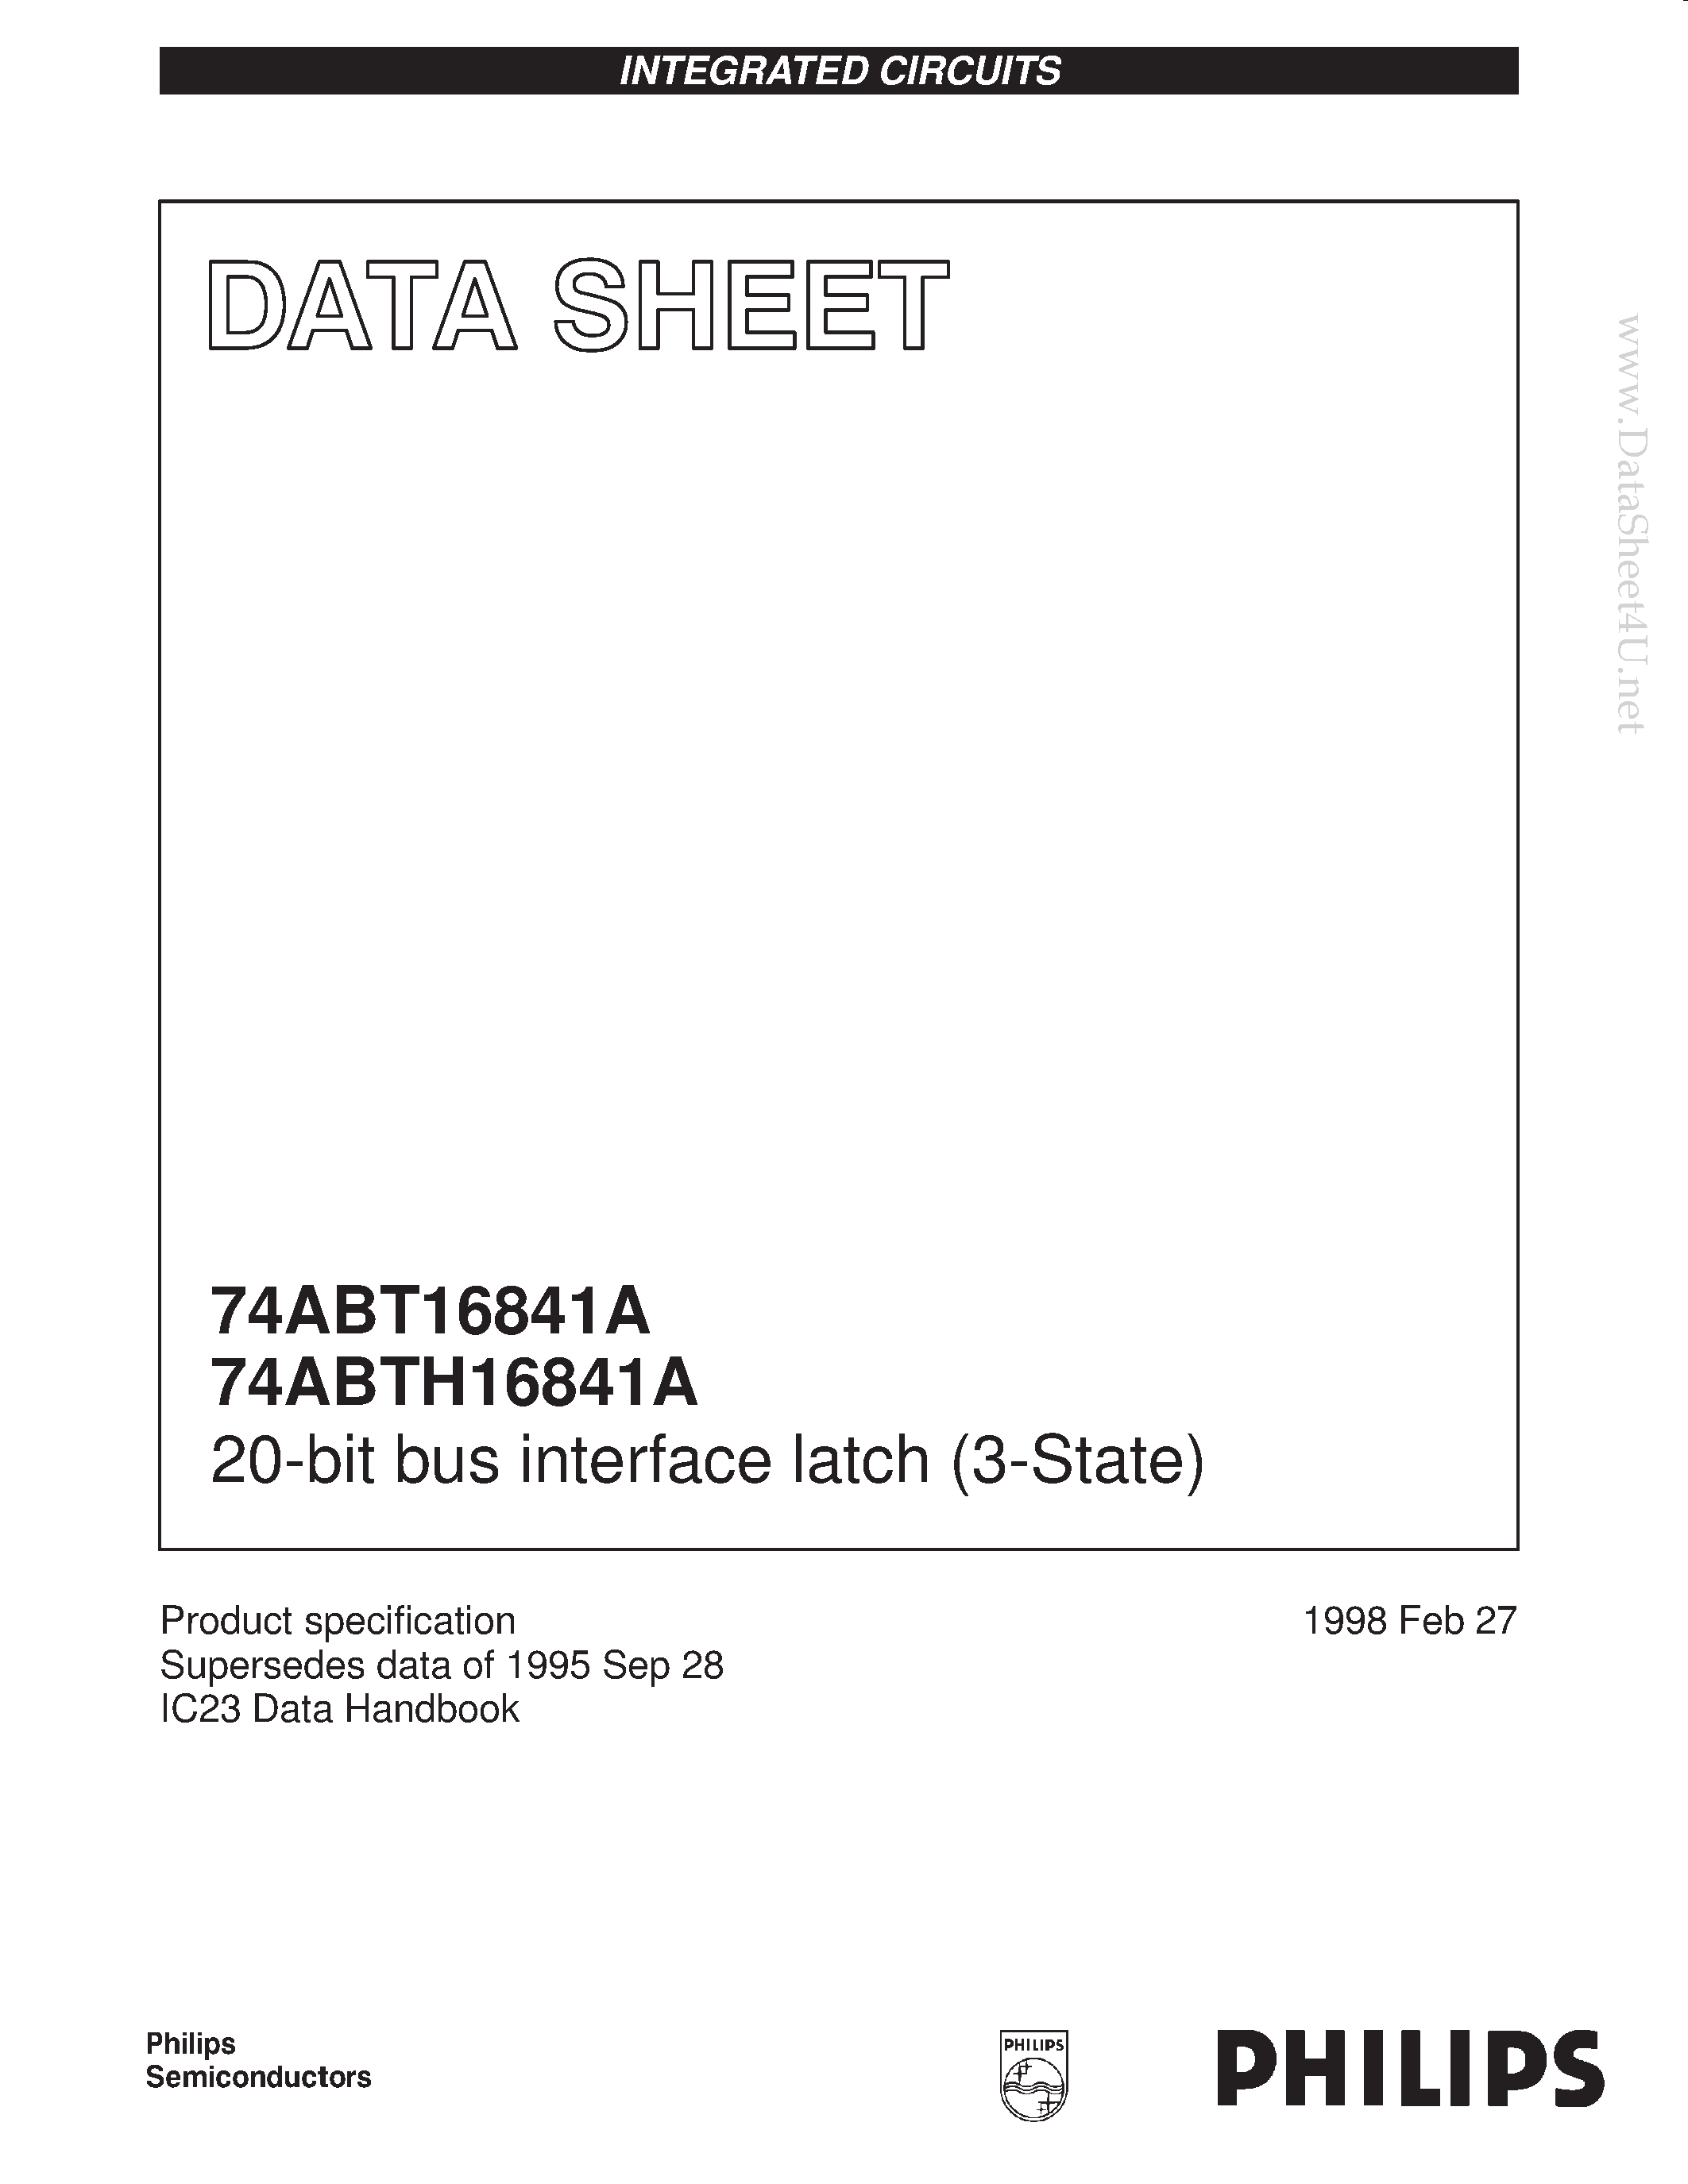 Datasheet 74ABTH16841ADL - 20-bit bus interface latch 3-State page 1